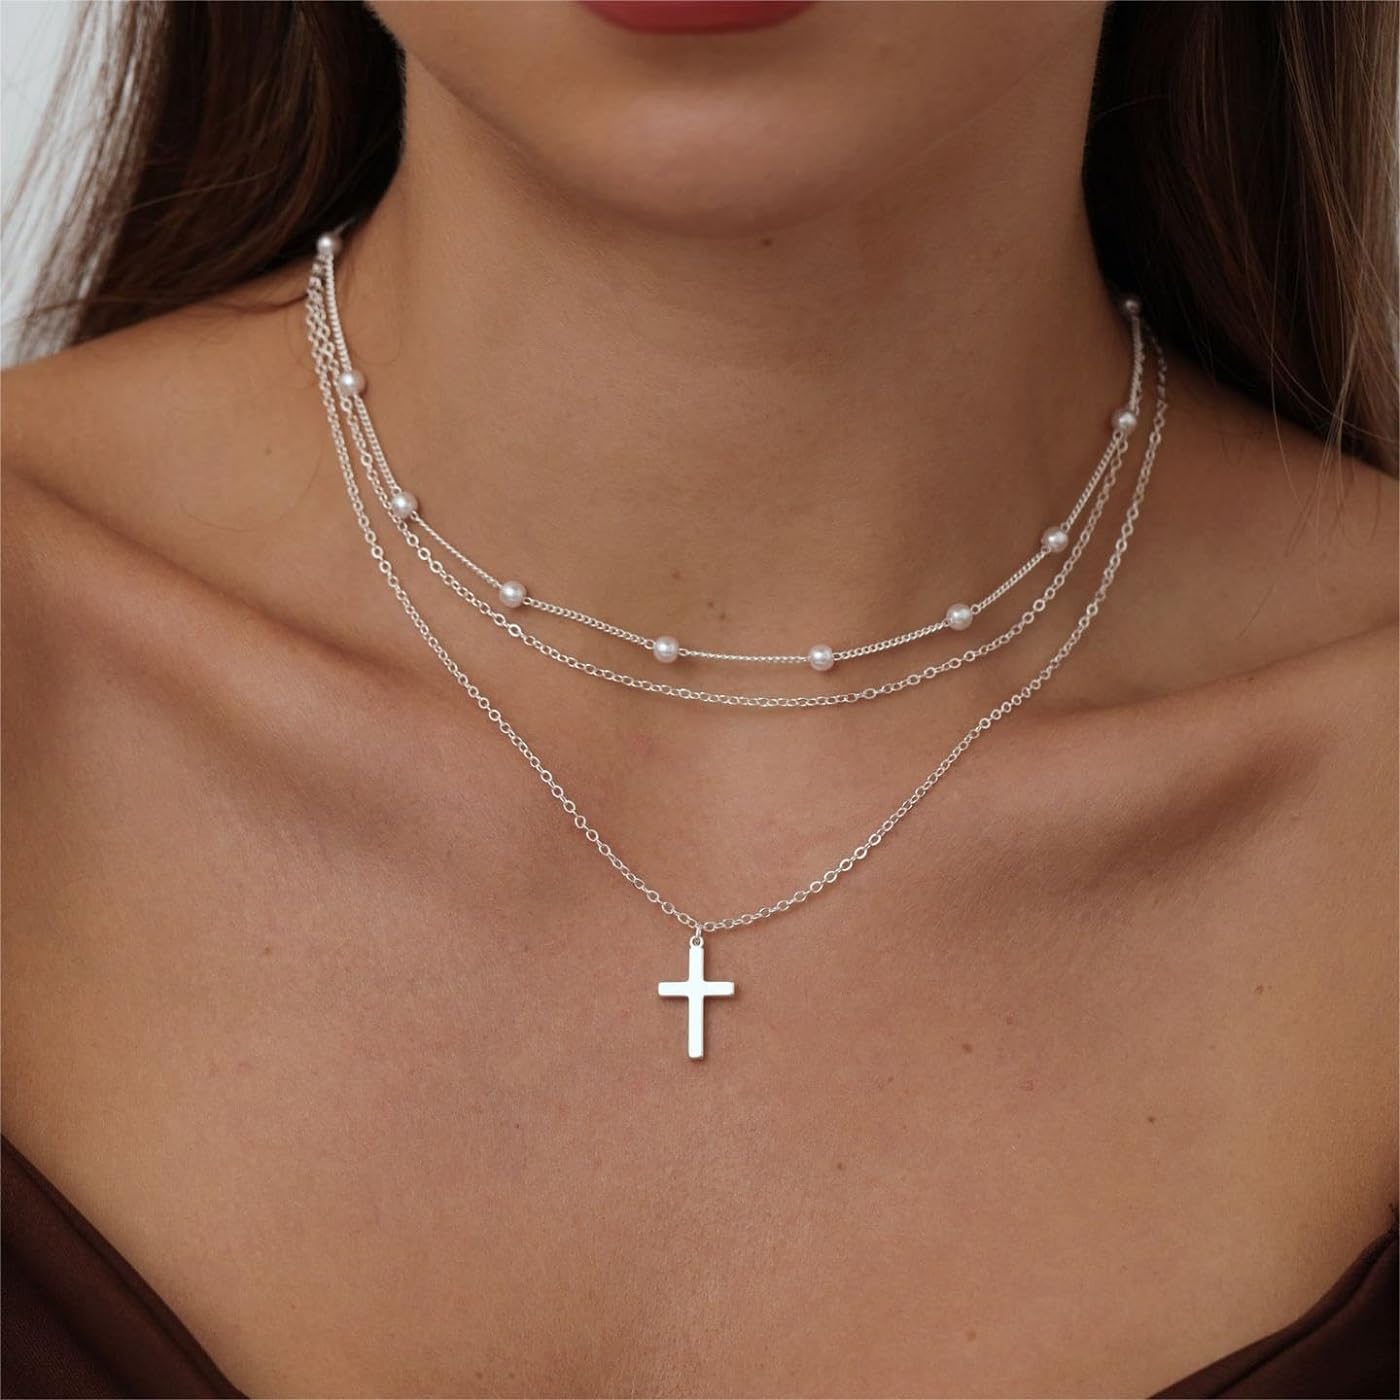 Tasiso Cross Necklace for Women 14K Gold Plated Dainty Cross Layered